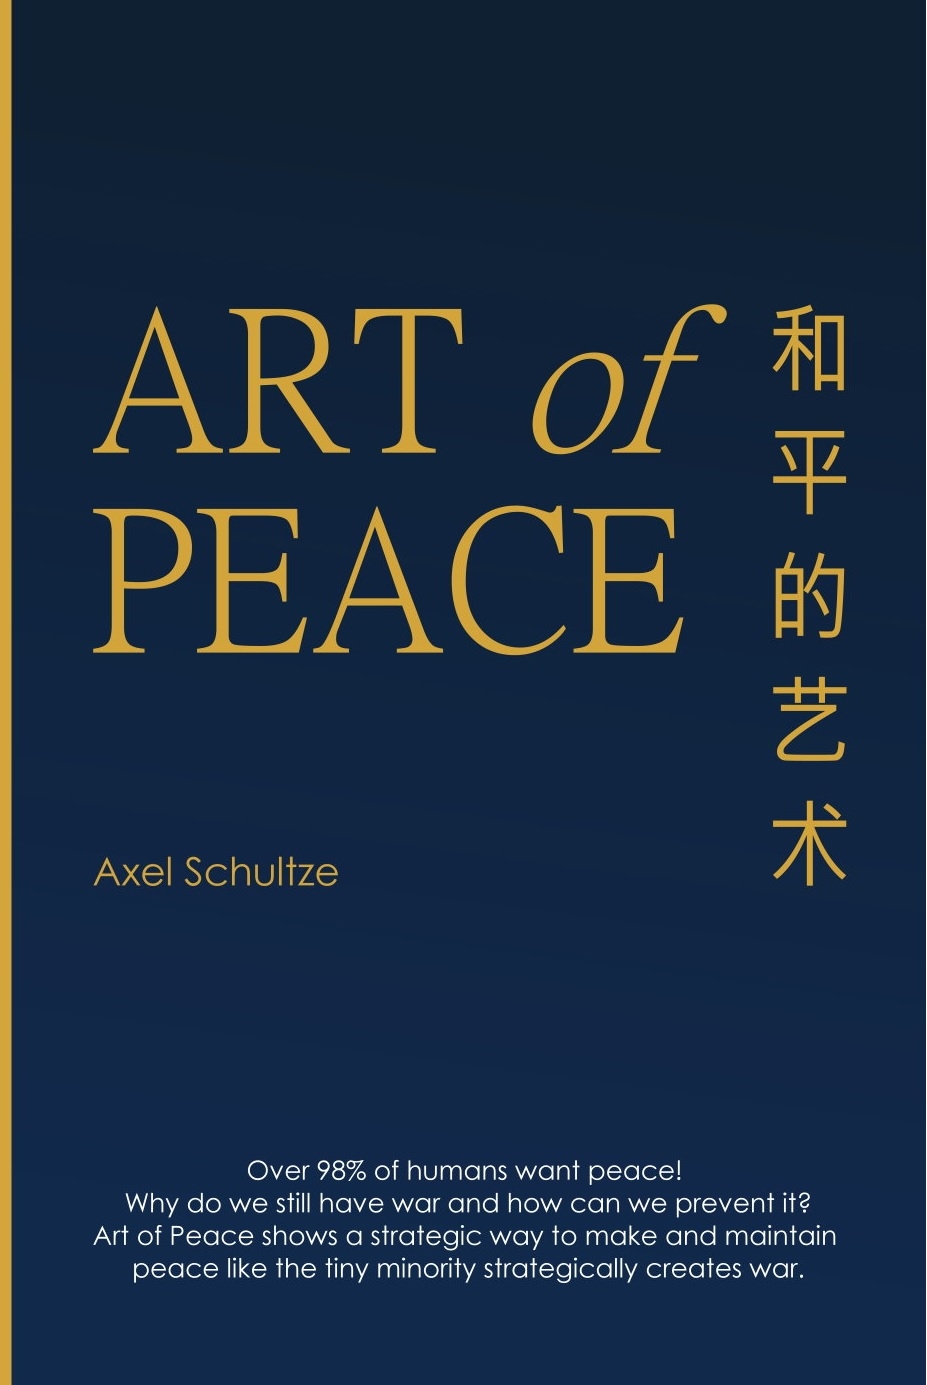 about art of peace with purpose